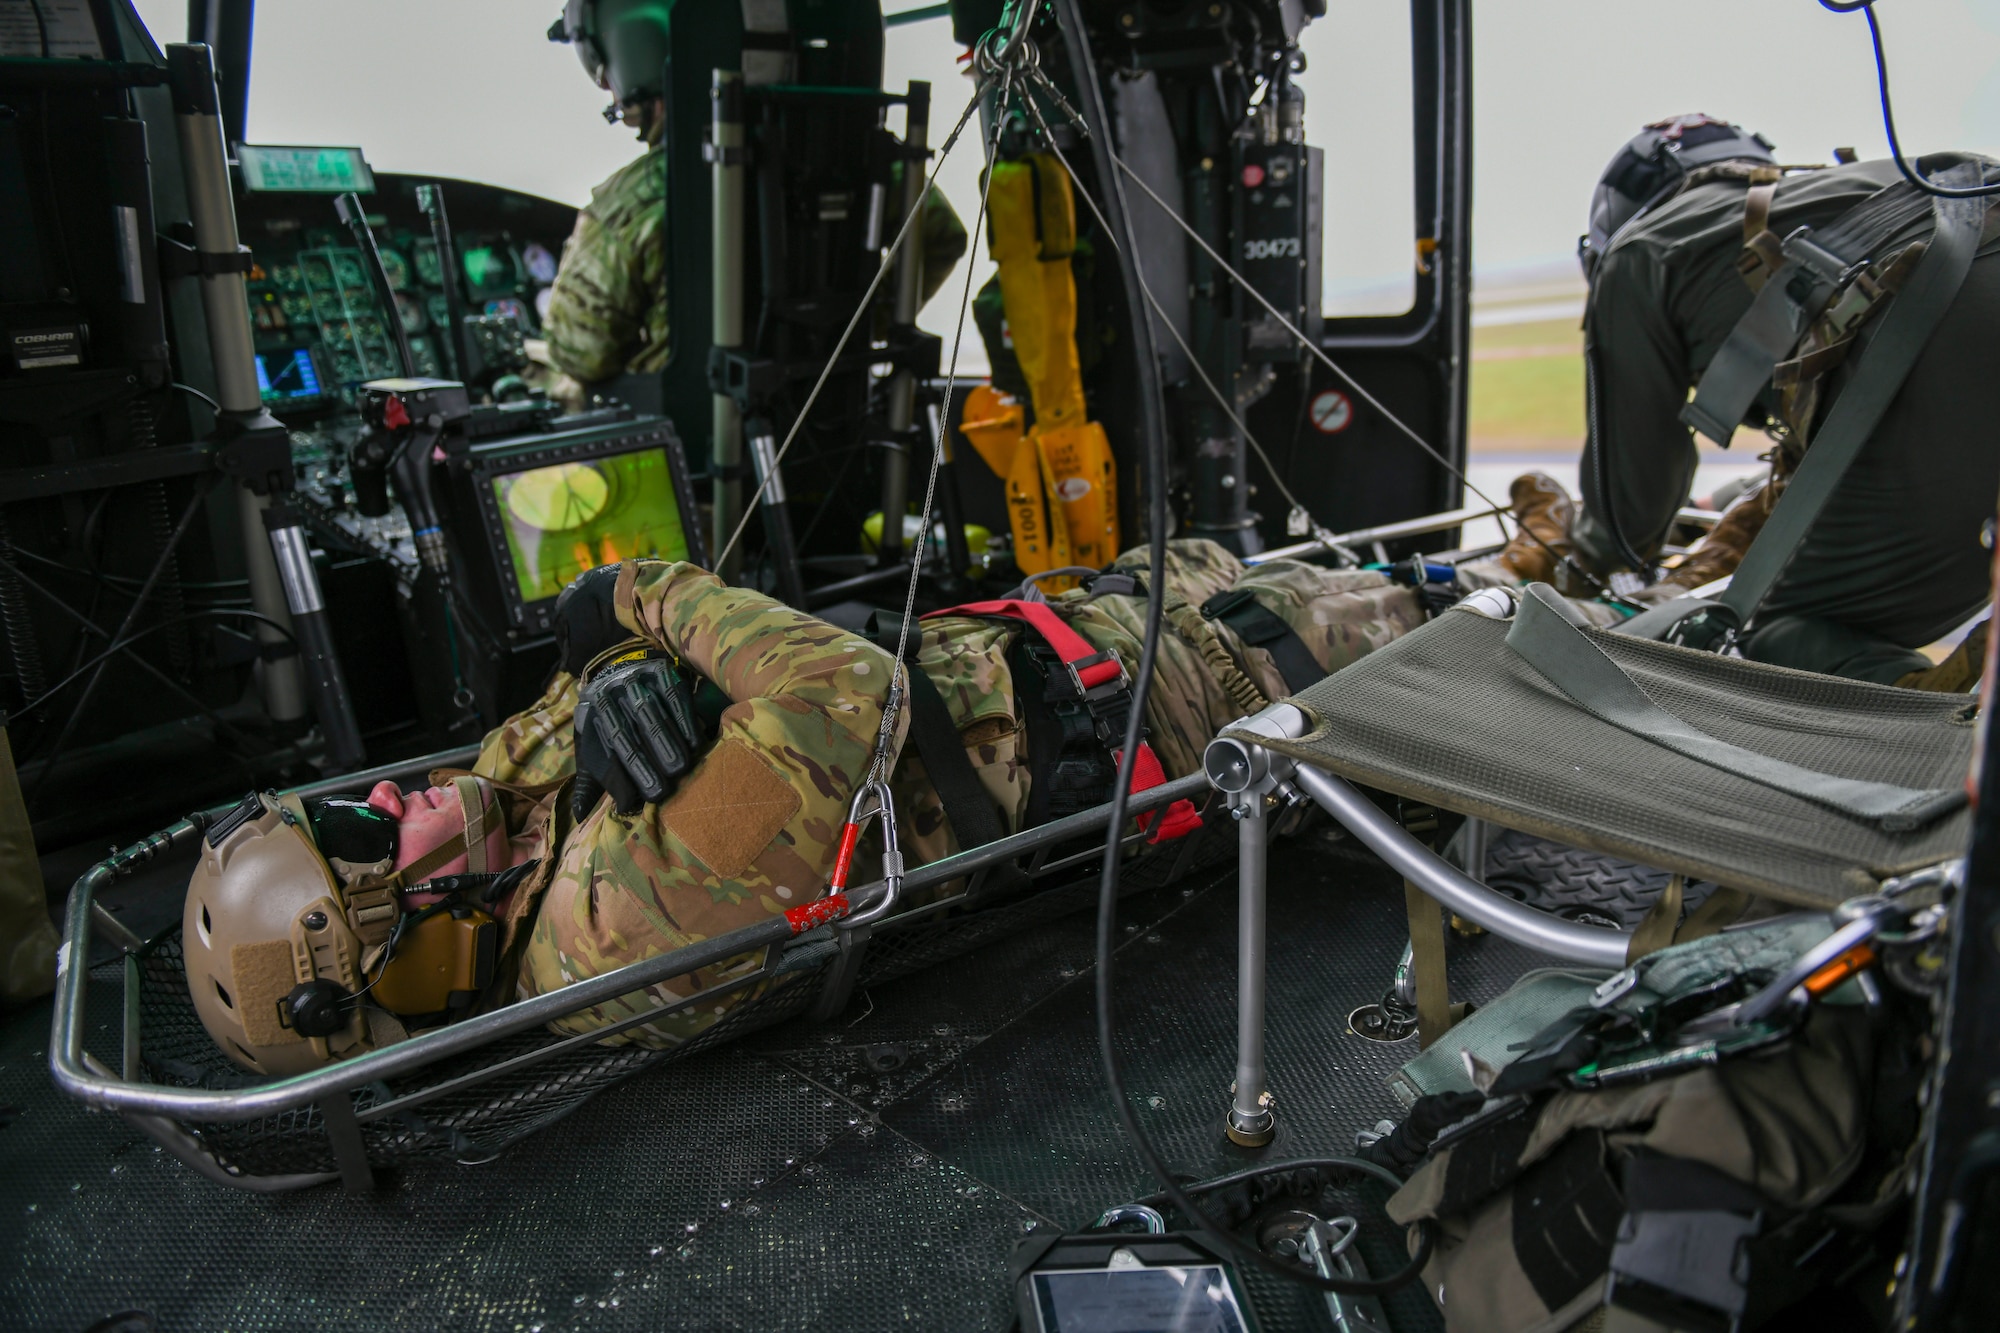 A U.S. Air Force Survival Evasion Resistance Escape Airman is hoisted up into a UH-1 Huey helicopter for a SERE demonstration during Skyfest 2022 at Fairchild Air Force Base, Washington, May 14, 2022. Fairchild Skyfest 2022 offered a unique view of Team Fairchild's role in enabling Rapid Global Mobility for the U.S. Air Force. (U.S. Air Force photo by Airman 1st Class Jenna Bond)